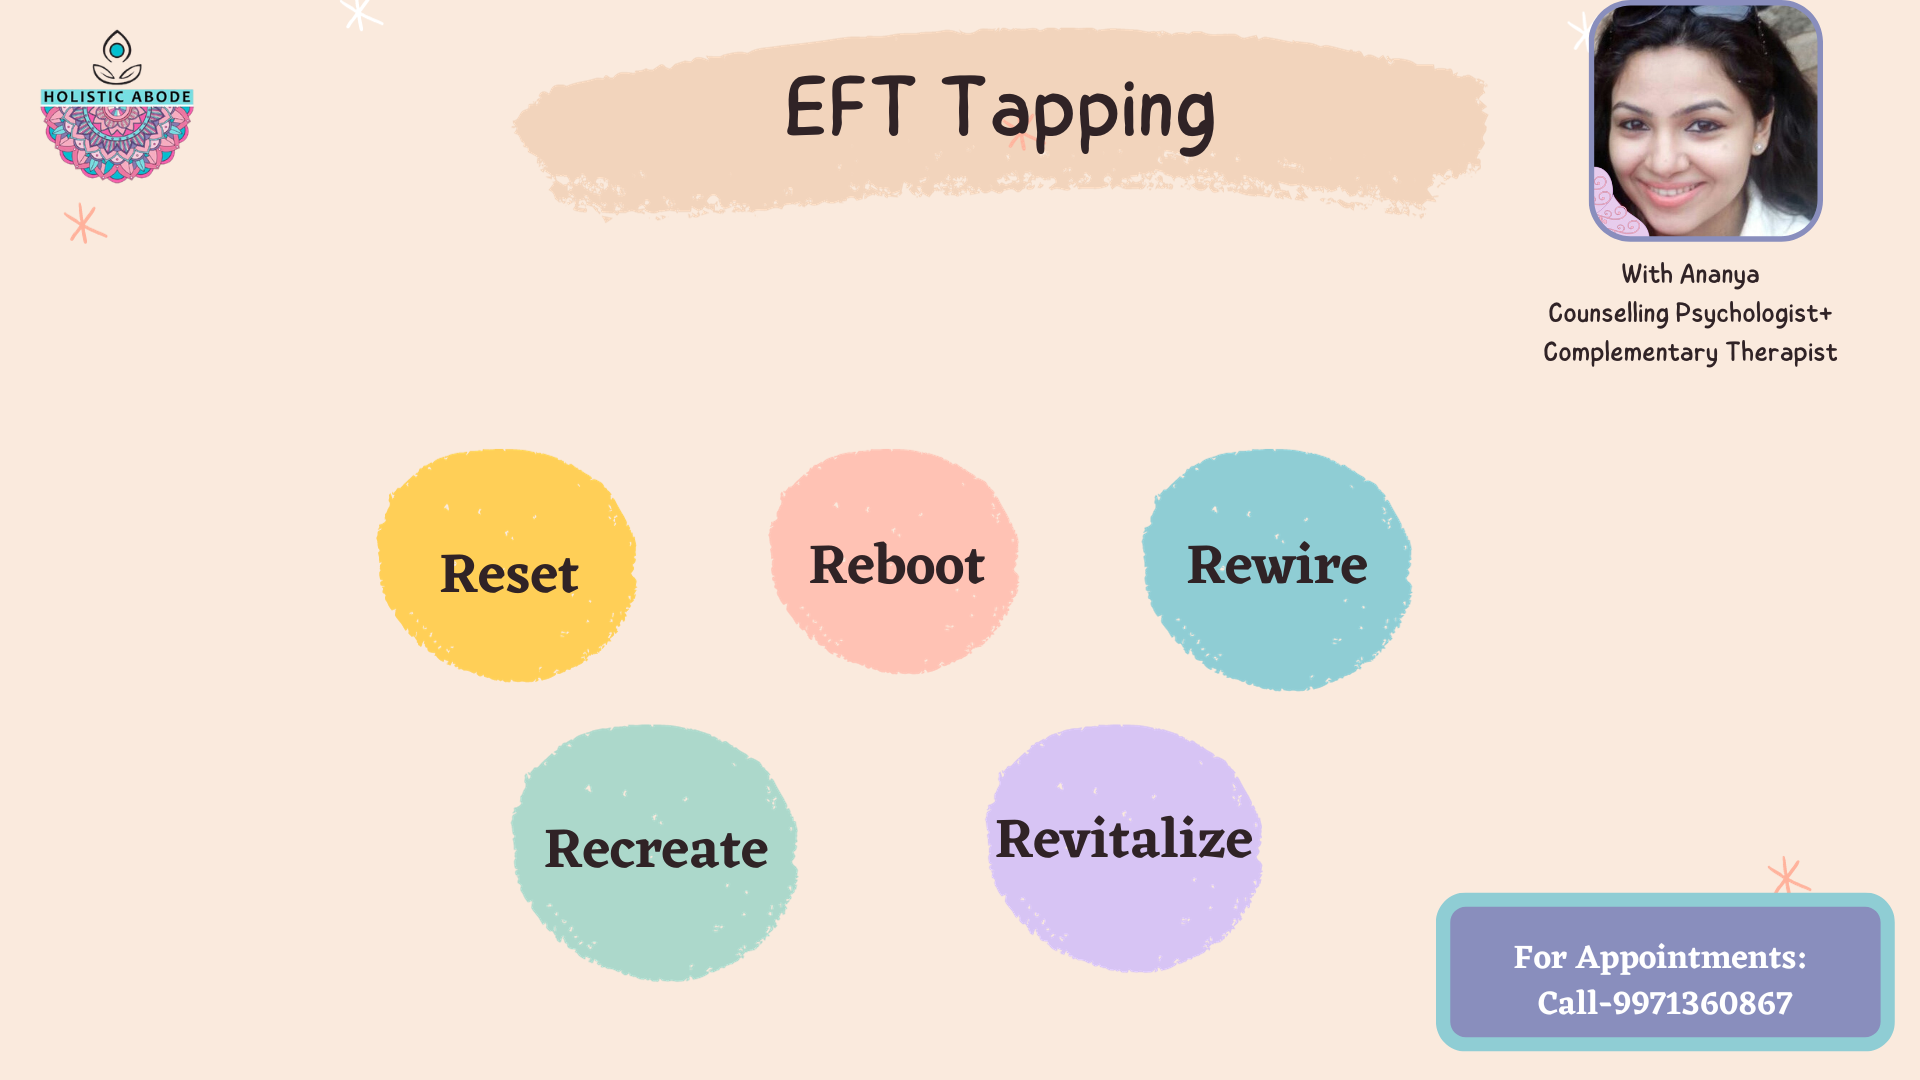 Introduction to EFT Tapping